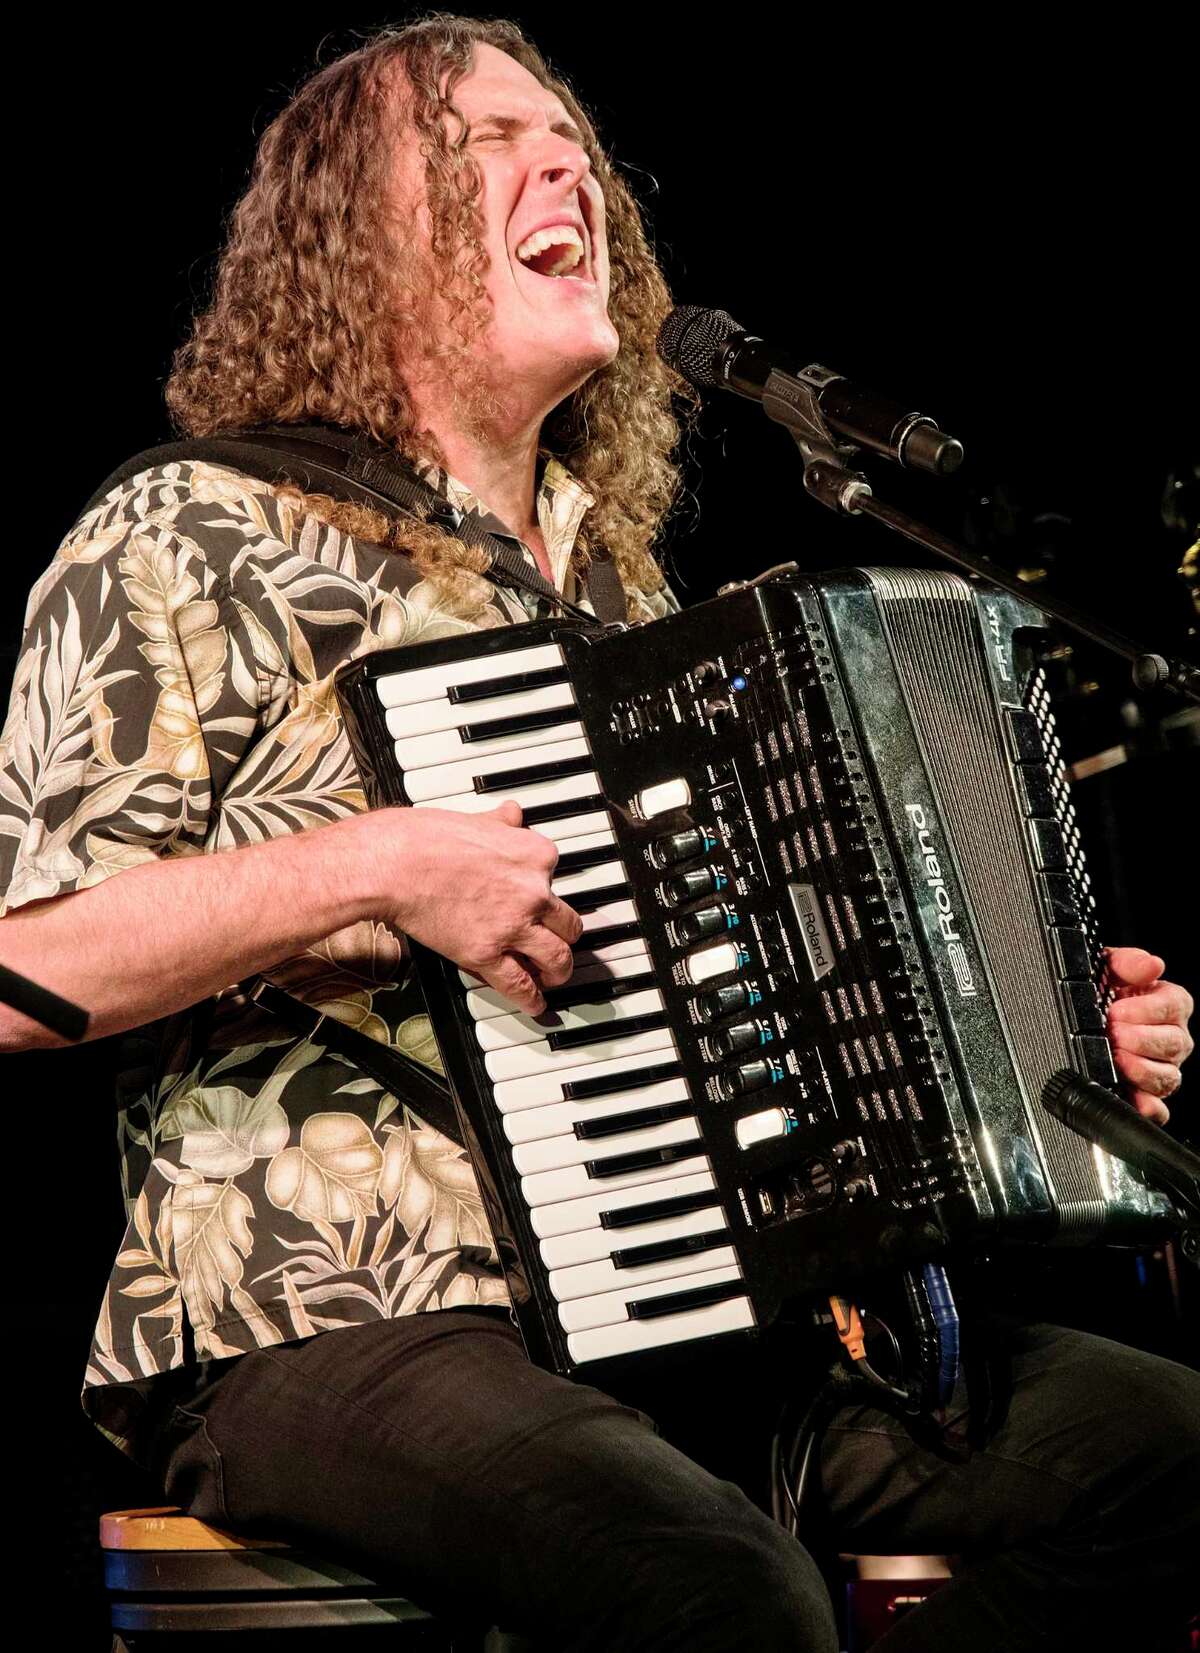 'Weird Al' Yankovic performs during his 'The Ridiculously Self-Indulgent, Ill-Advised Vanity Tour' at The Apollo Theater on March 22, 2018 in New York City.